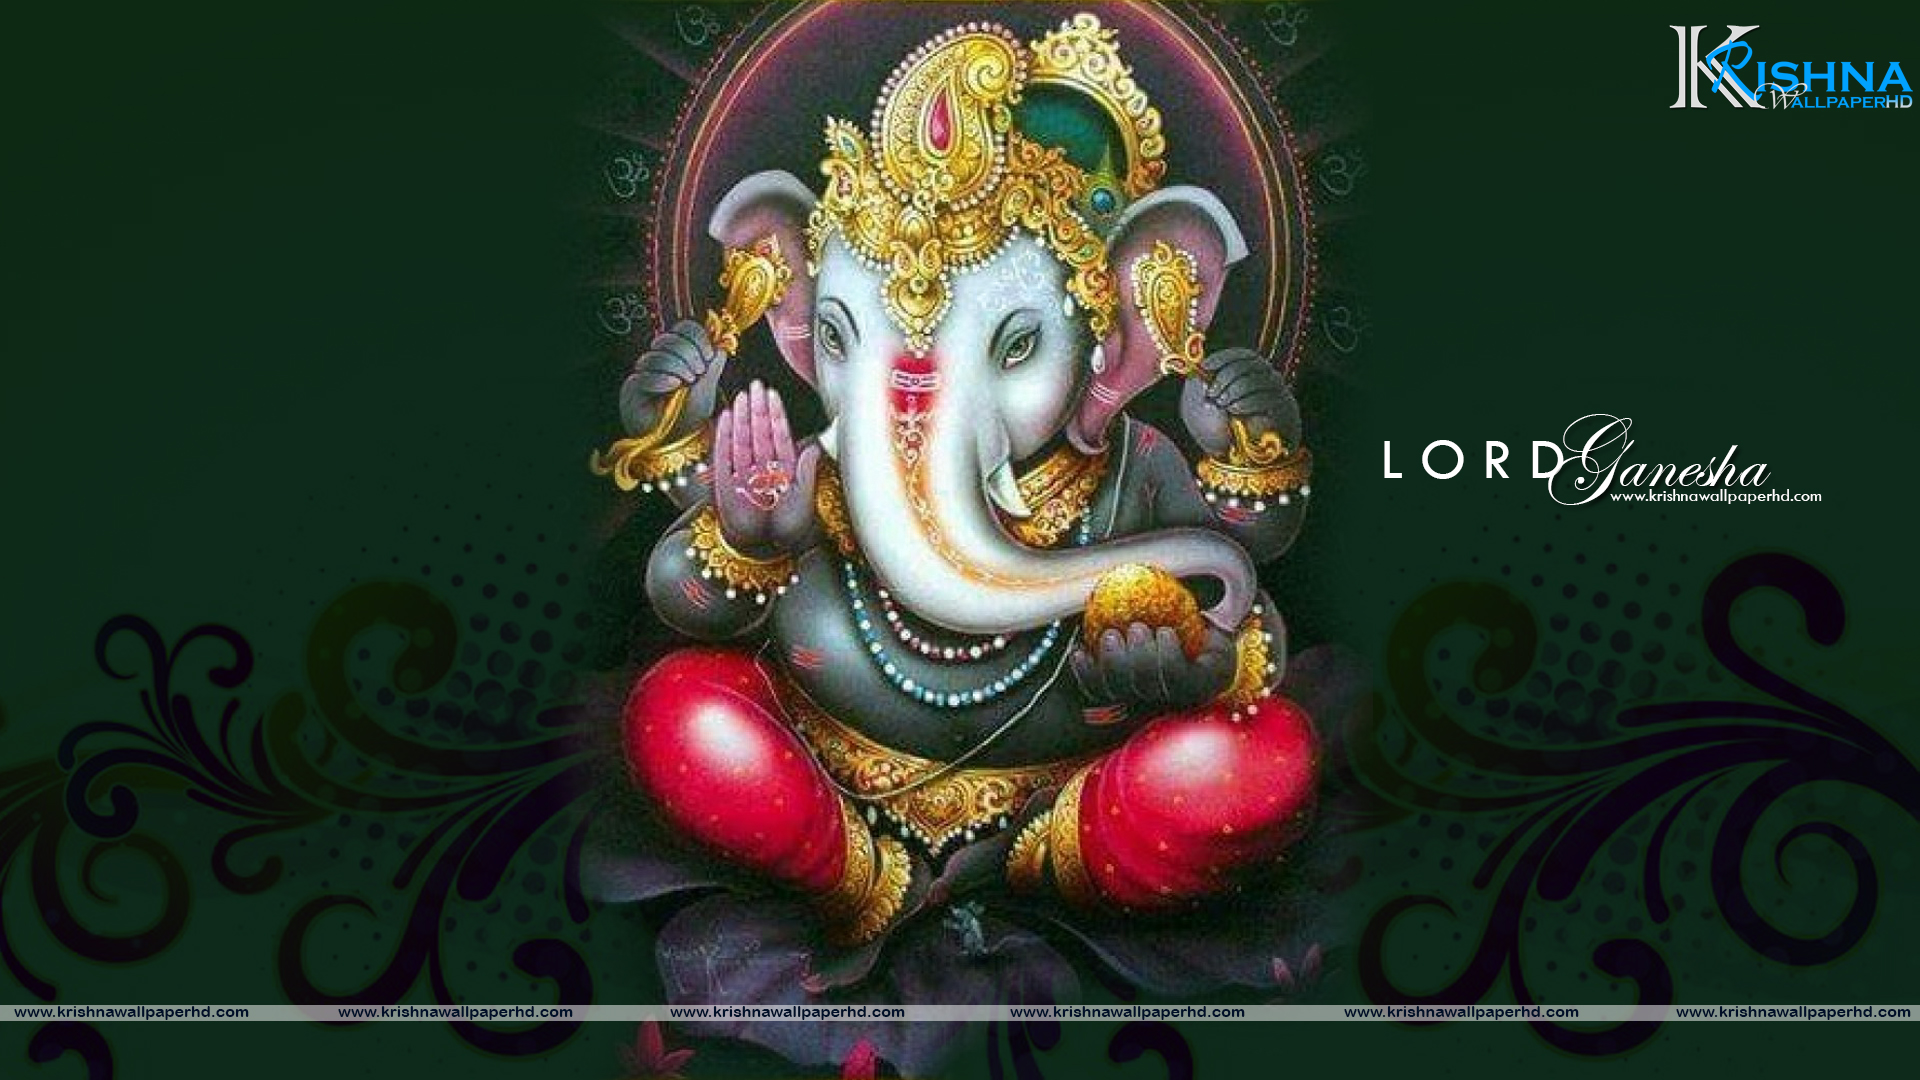 Wallpaper Of Lord Ganesha In Full Hd Size Free Download - Ganesha Tattoo , HD Wallpaper & Backgrounds